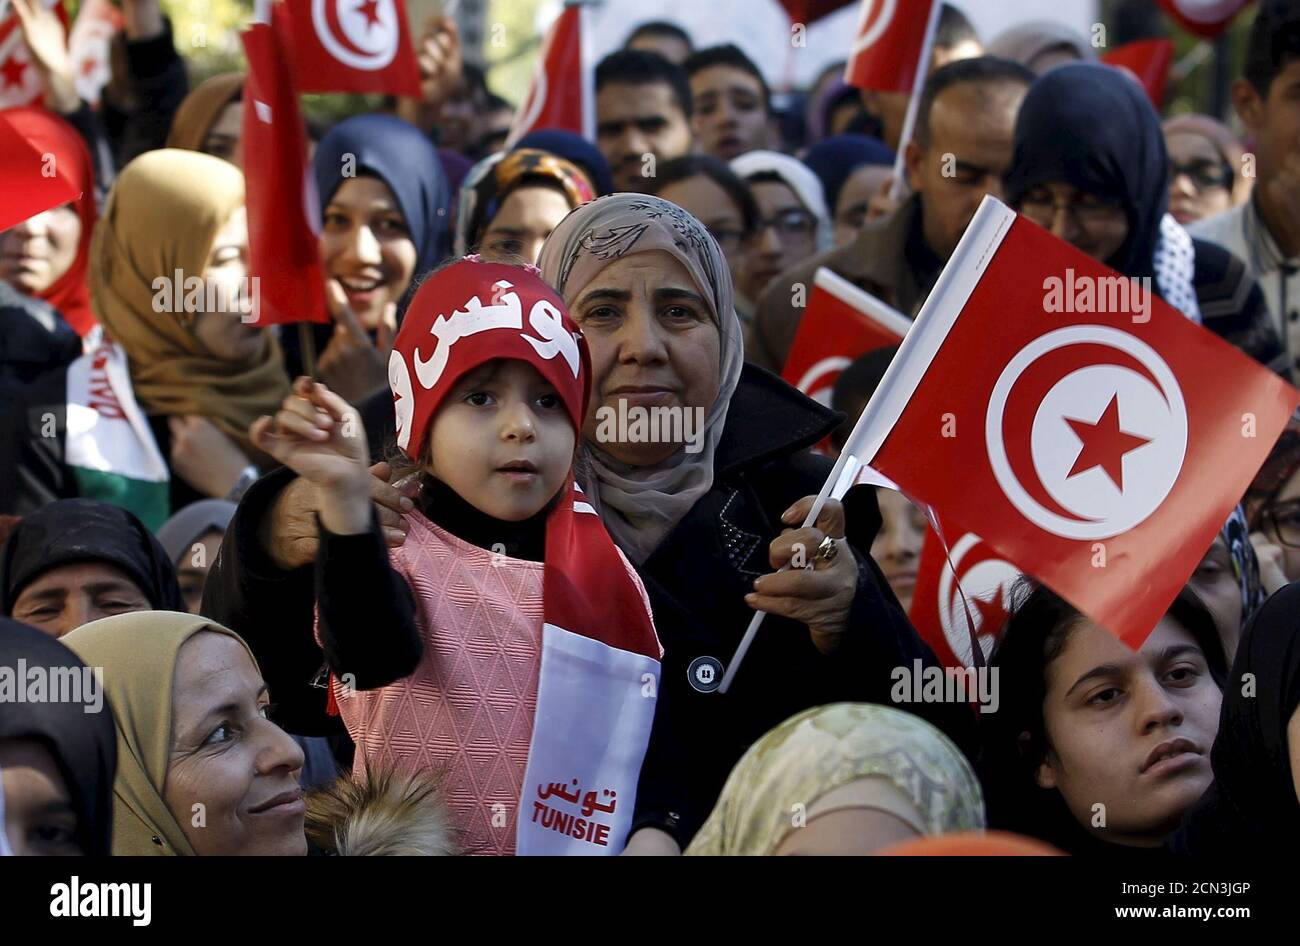 A girl waves a Tunisian flags during celebrations marking the fifth anniversary of Tunisia's 2011 revolution, in Habib Bourguiba Avenue in Tunis, Tunisia January 14, 2016. REUTERS/Zoubeir Souissi Stock Photo